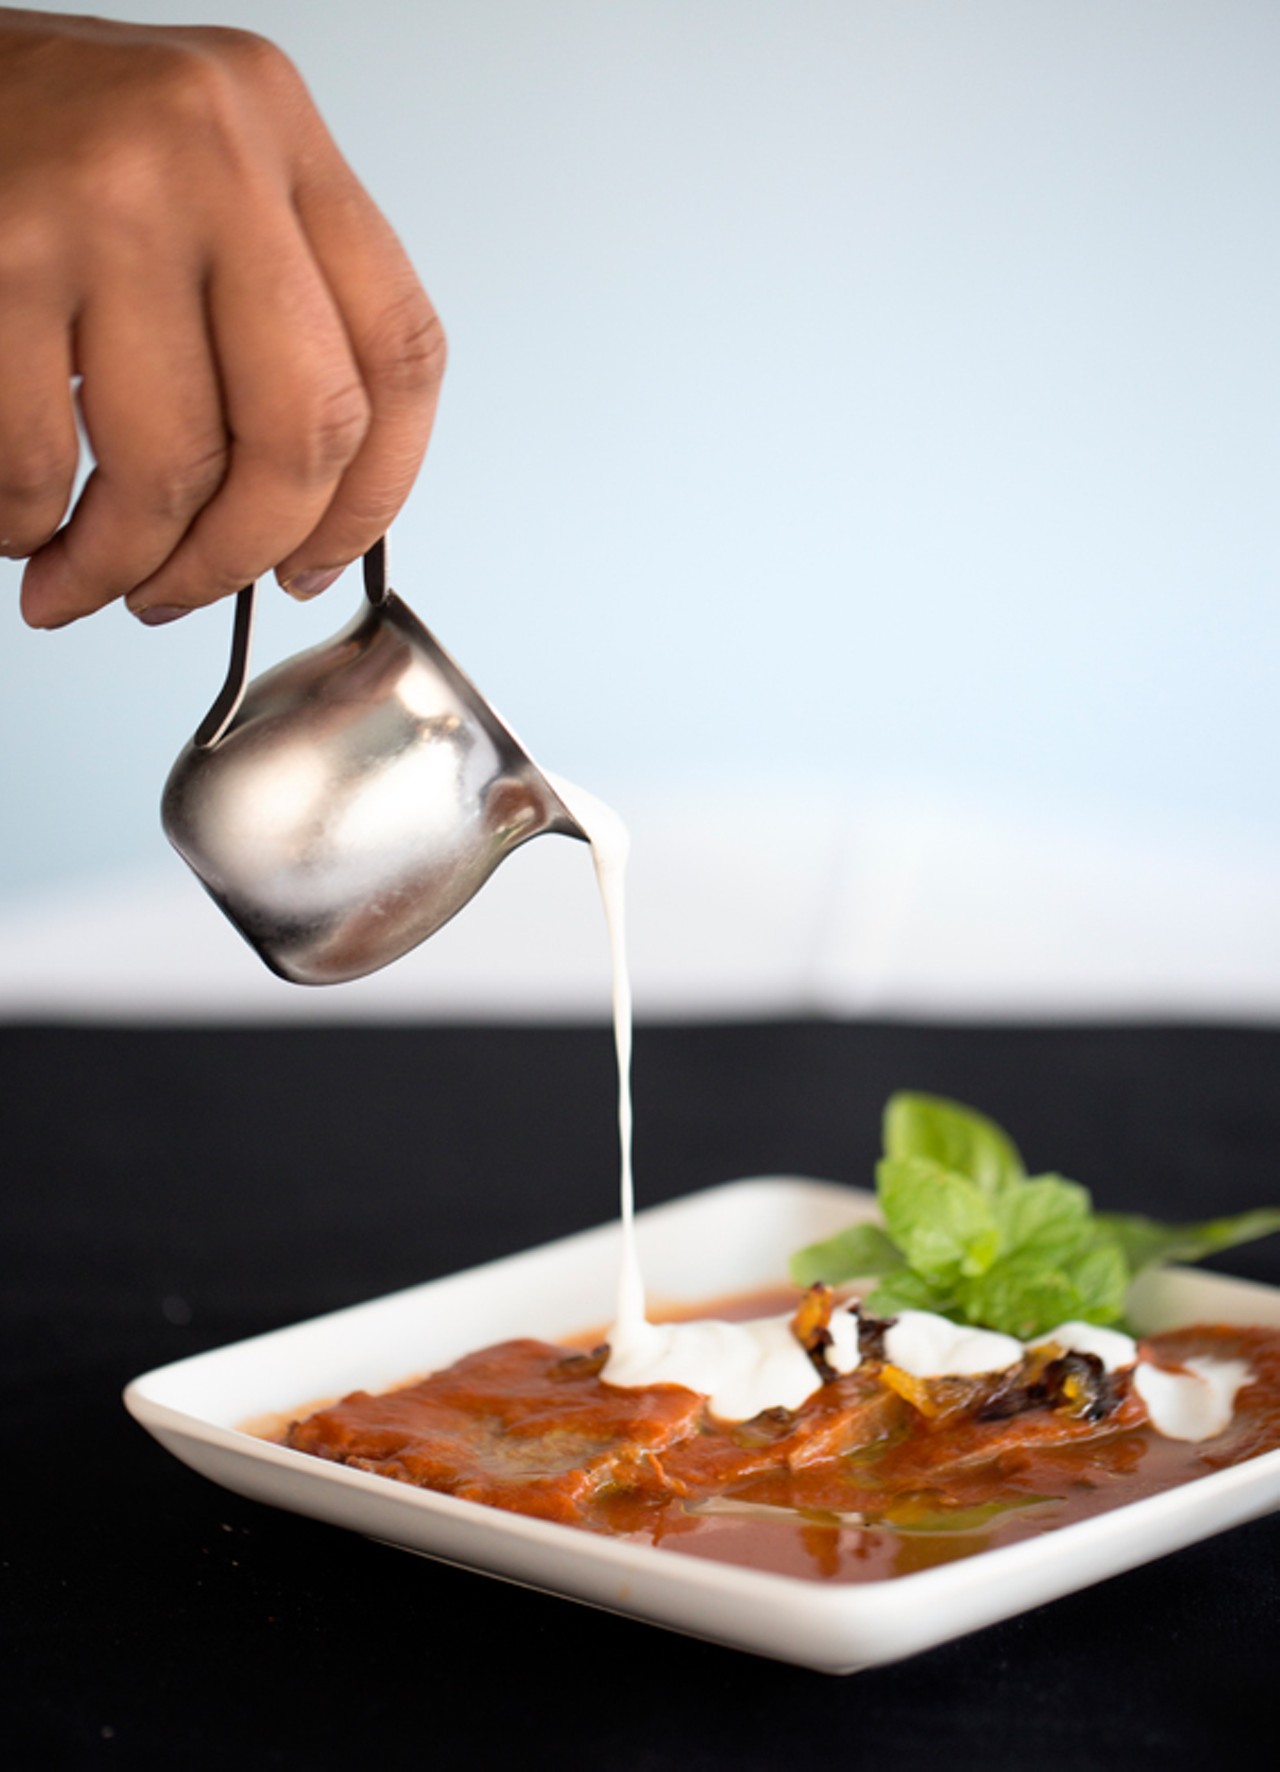 The beef tongue is served sliced in a buttery broth, with curry mustard sauce and yogurt.